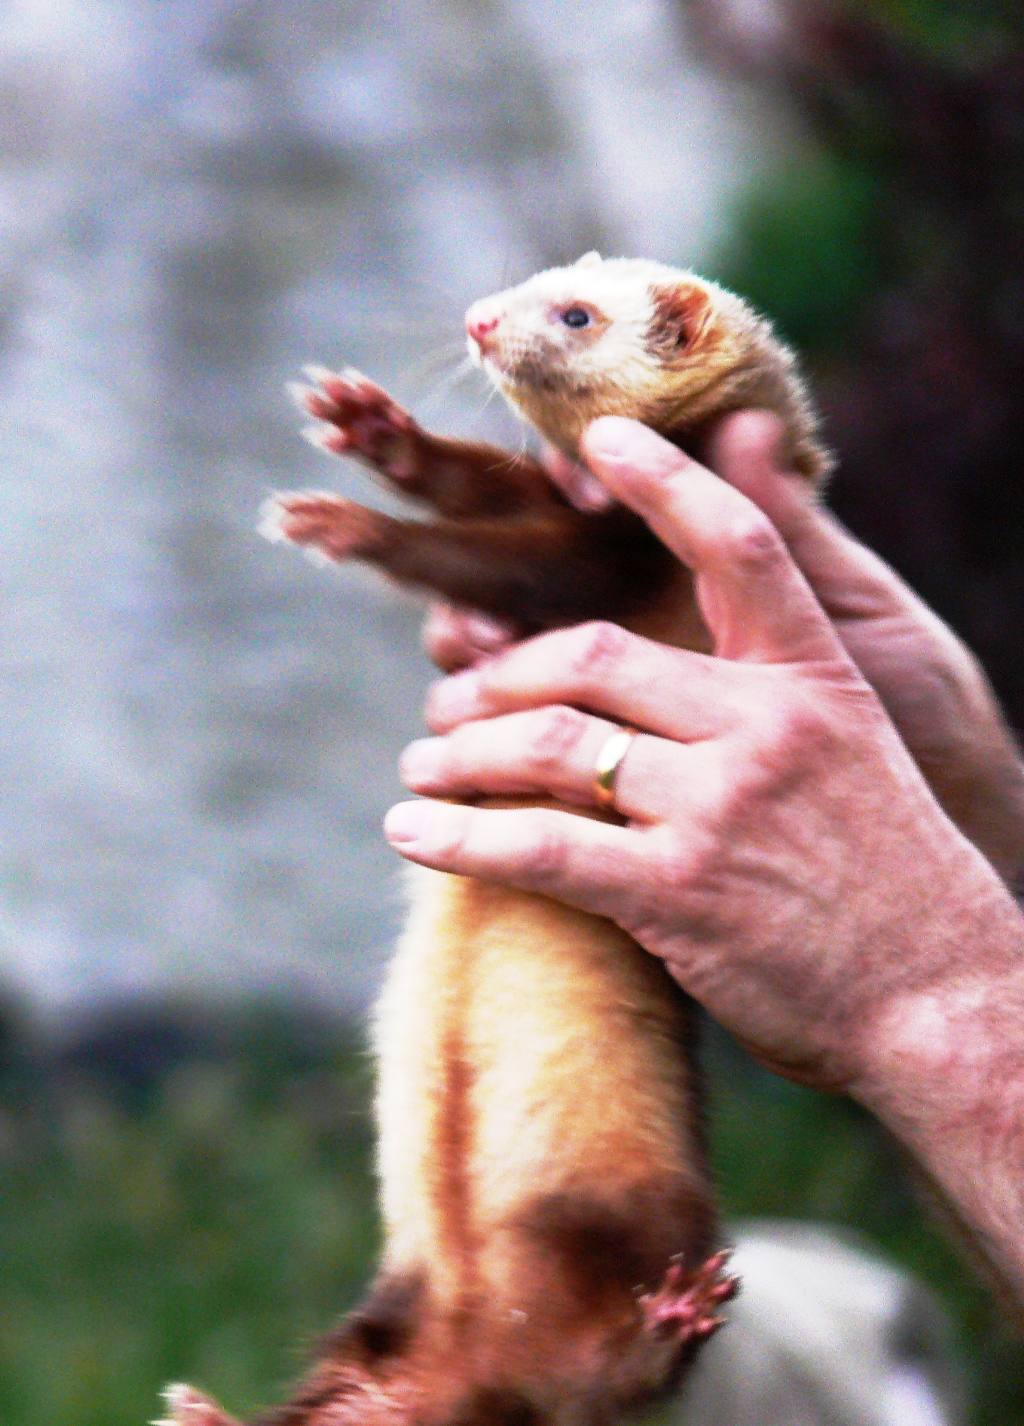 Fun & Frolics with Ferrets - Who's a pretty thing ....